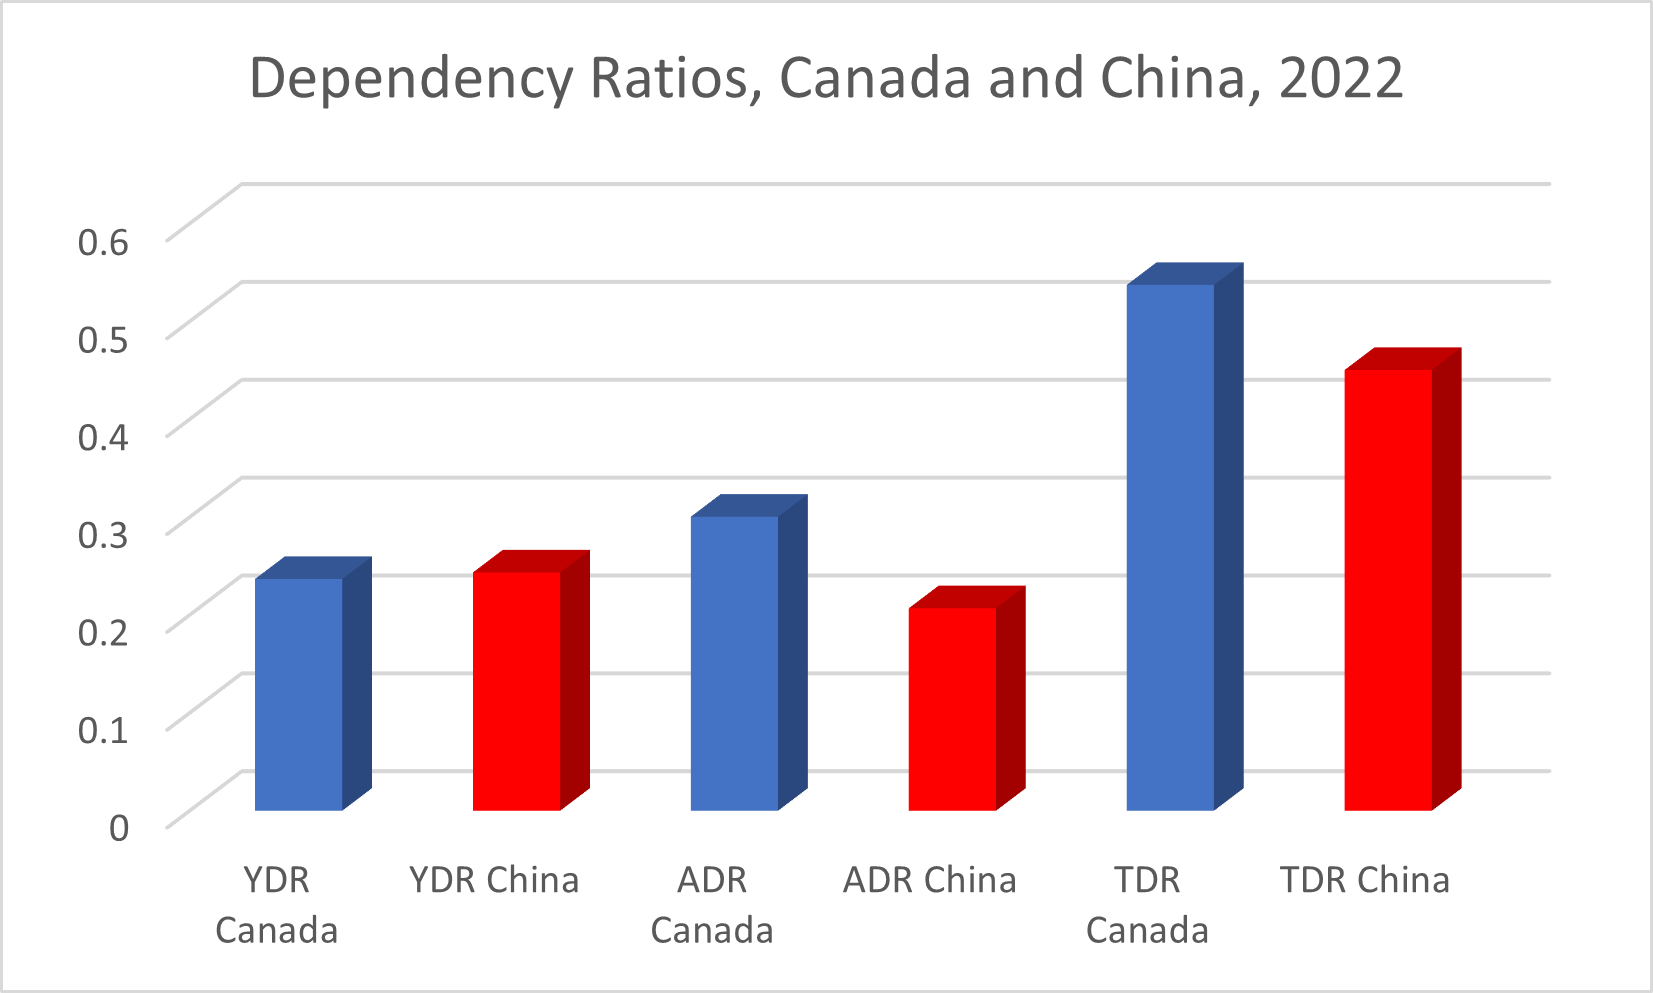 This chart shows that the Young Dependency Ratio in 2023 was slightly higher in China than it was in Canada, whether including 15-19 year olds as children, or not. The Aged Dependency Ratio and Total Dependency Ratio are still significantly higher in Canada than in China.